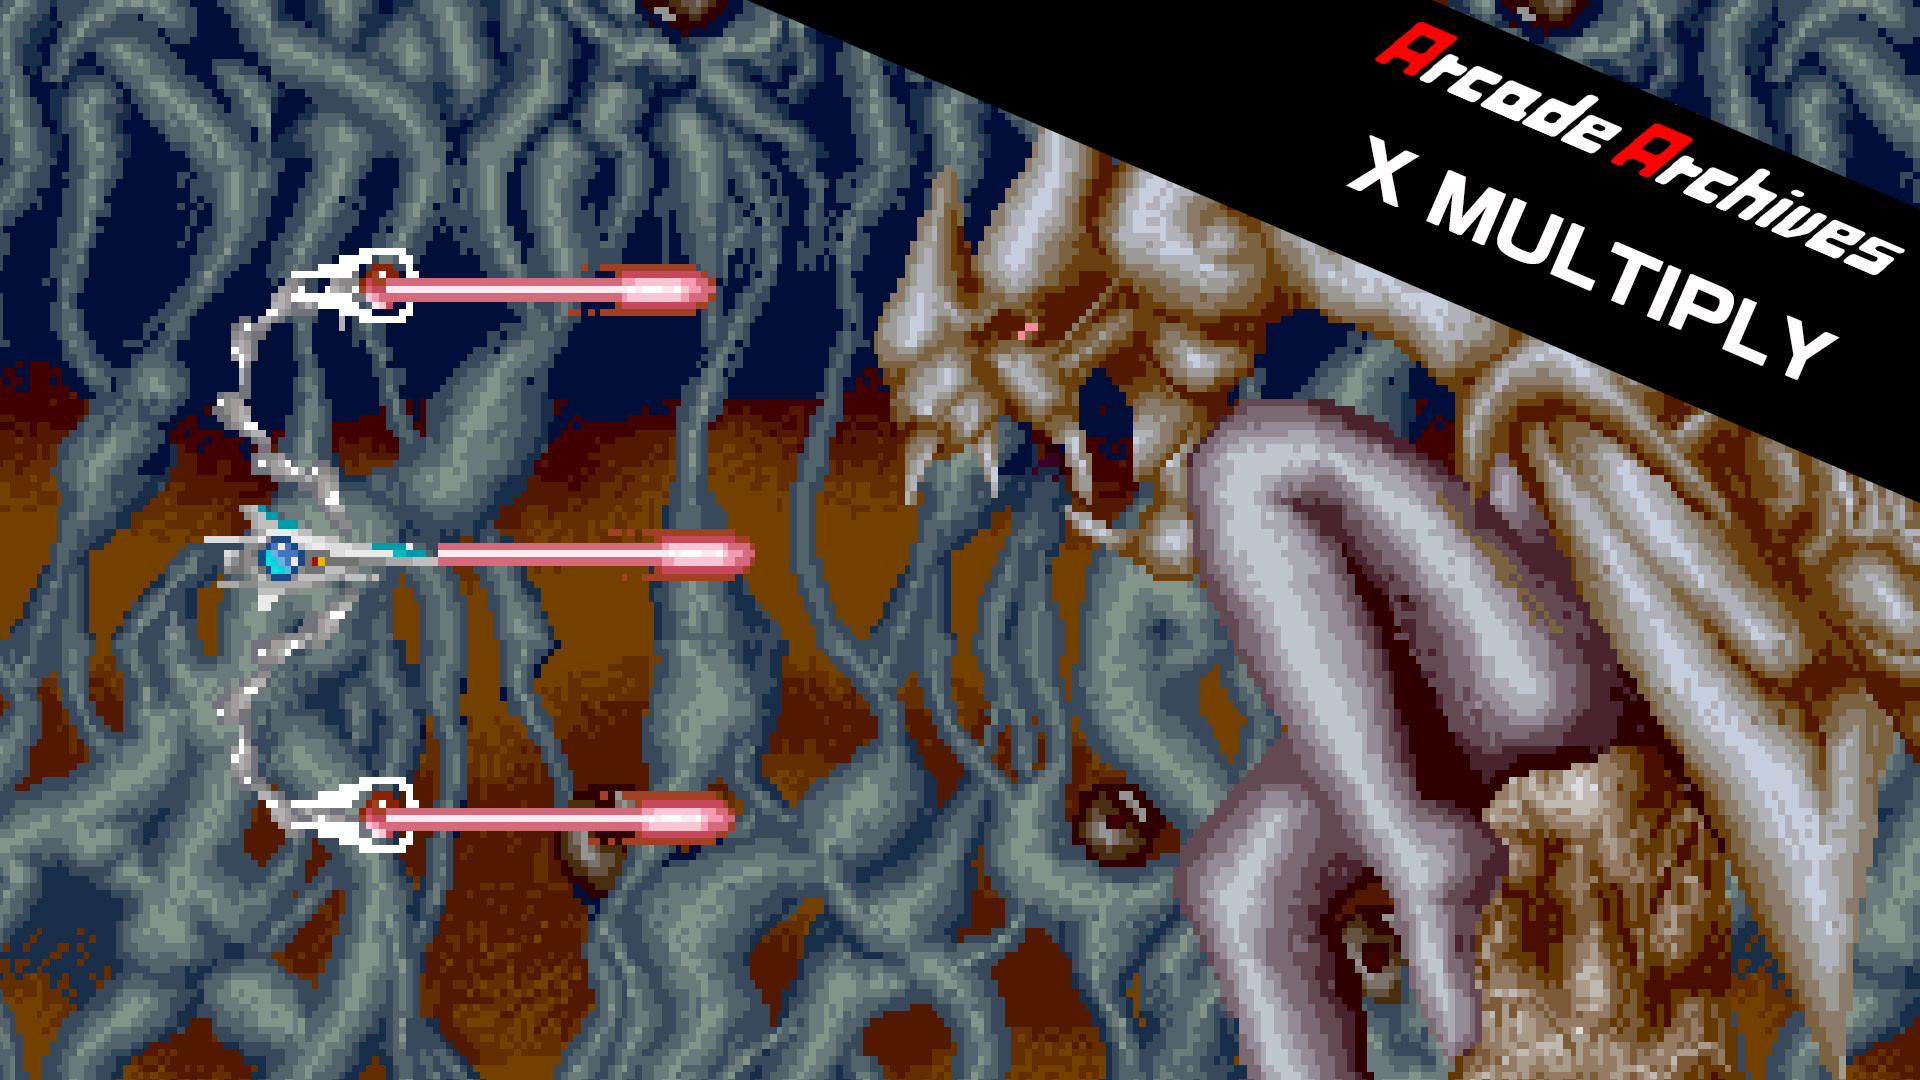 Arcade Archives X MULTIPLY